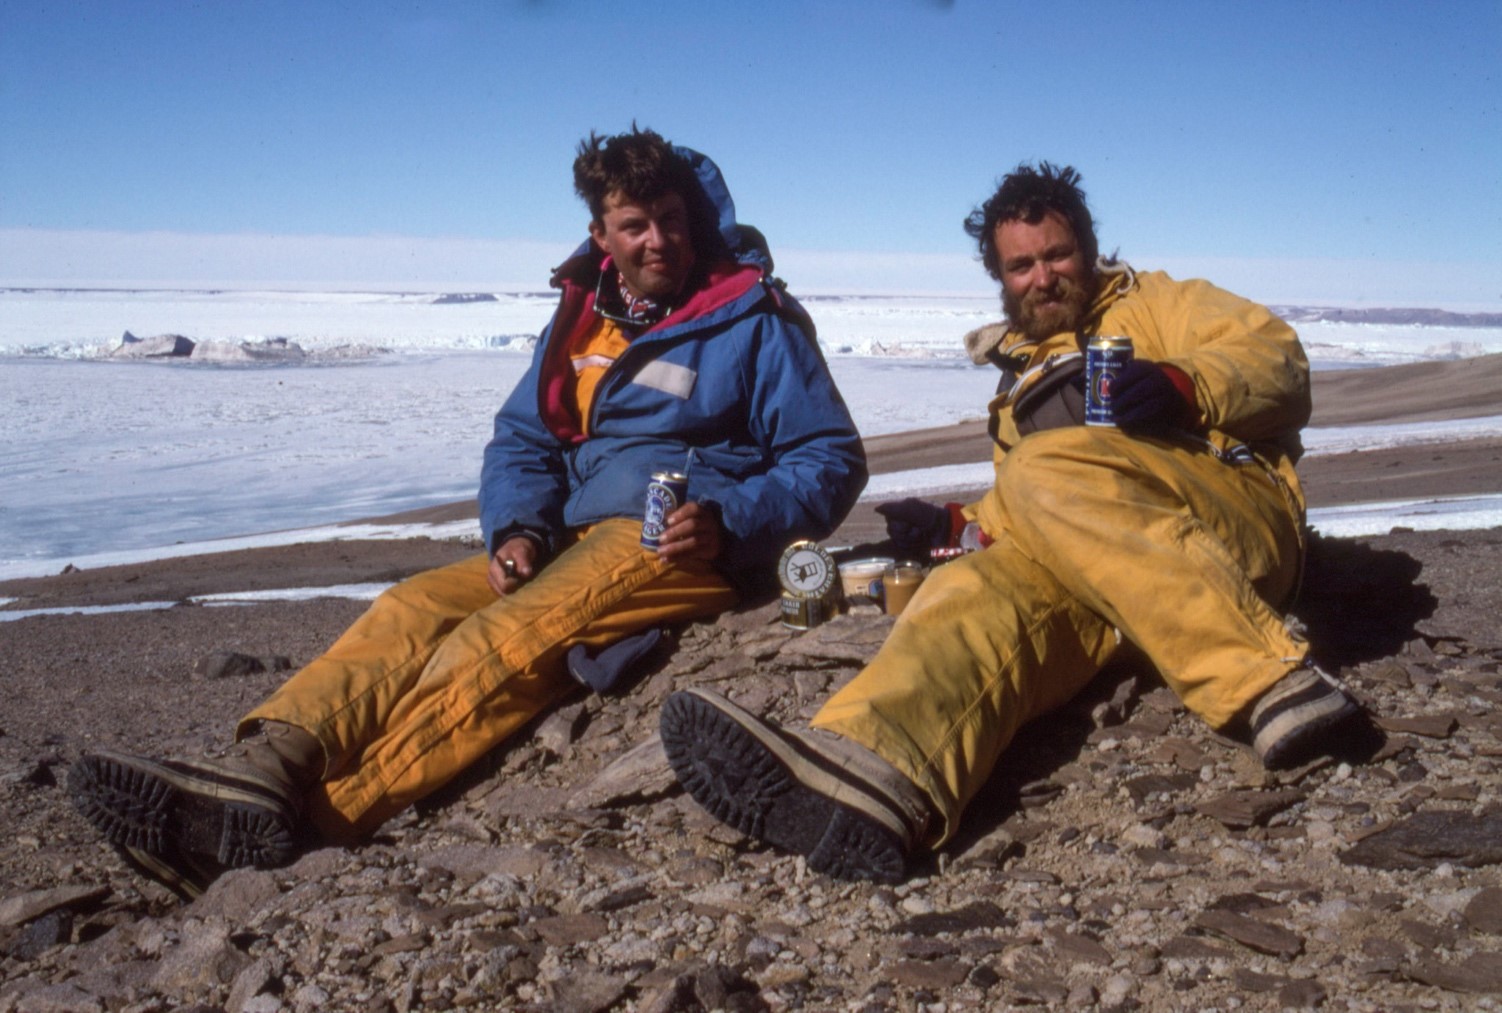 Beers at the end of 42 days in the field Prince Charles Mountains, Antarctica, Feb 1995. Image: Derek Fabel